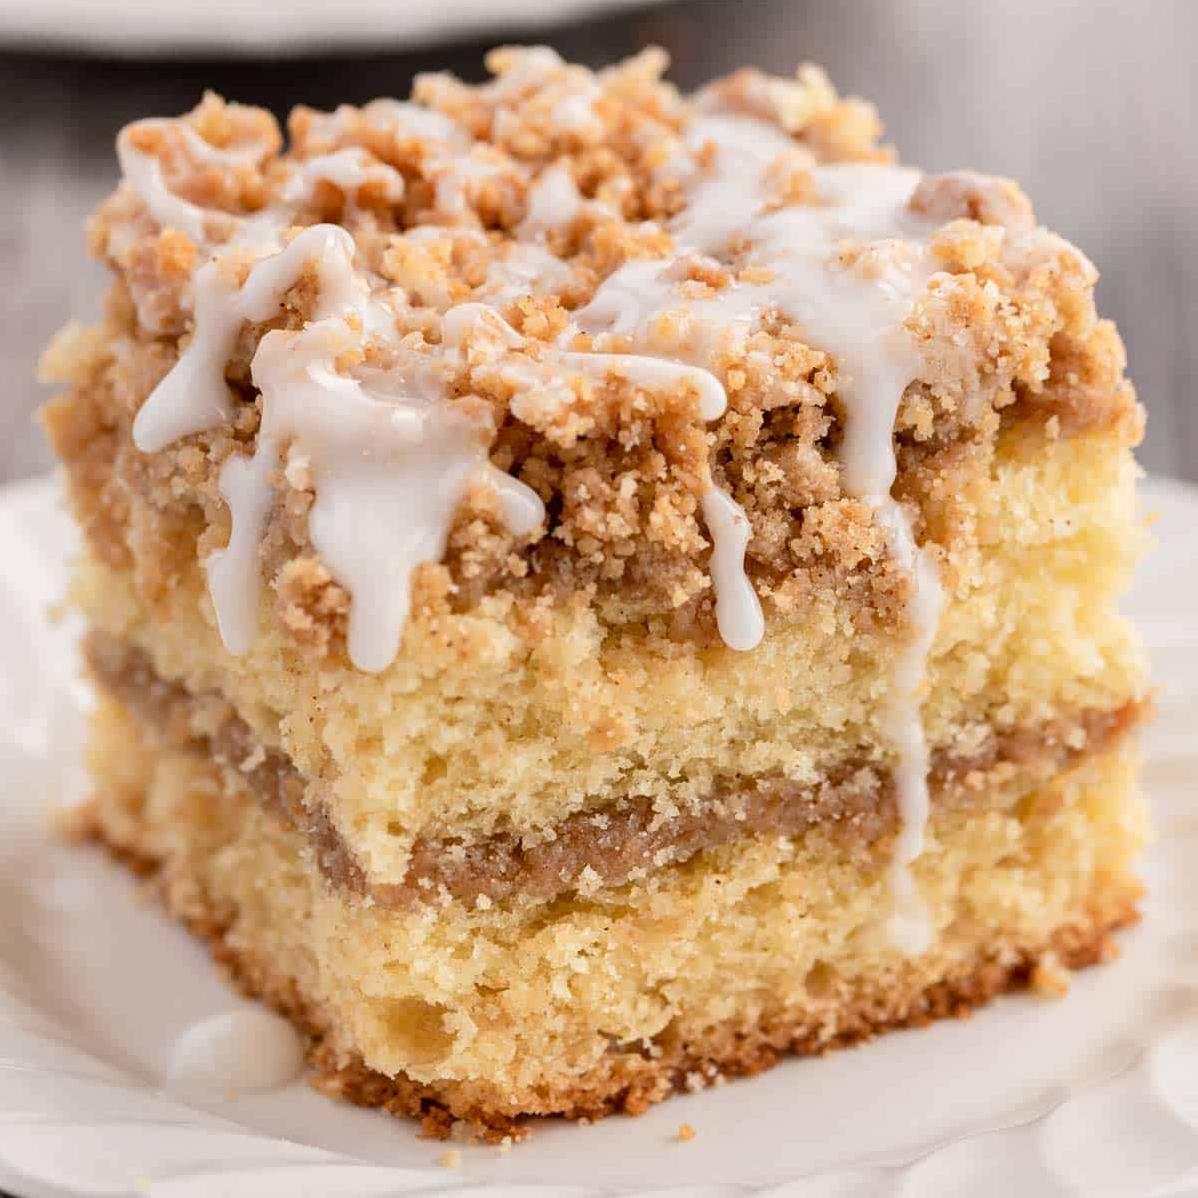  Perfectly spiced cake with a golden crust and buttery crumb topping.